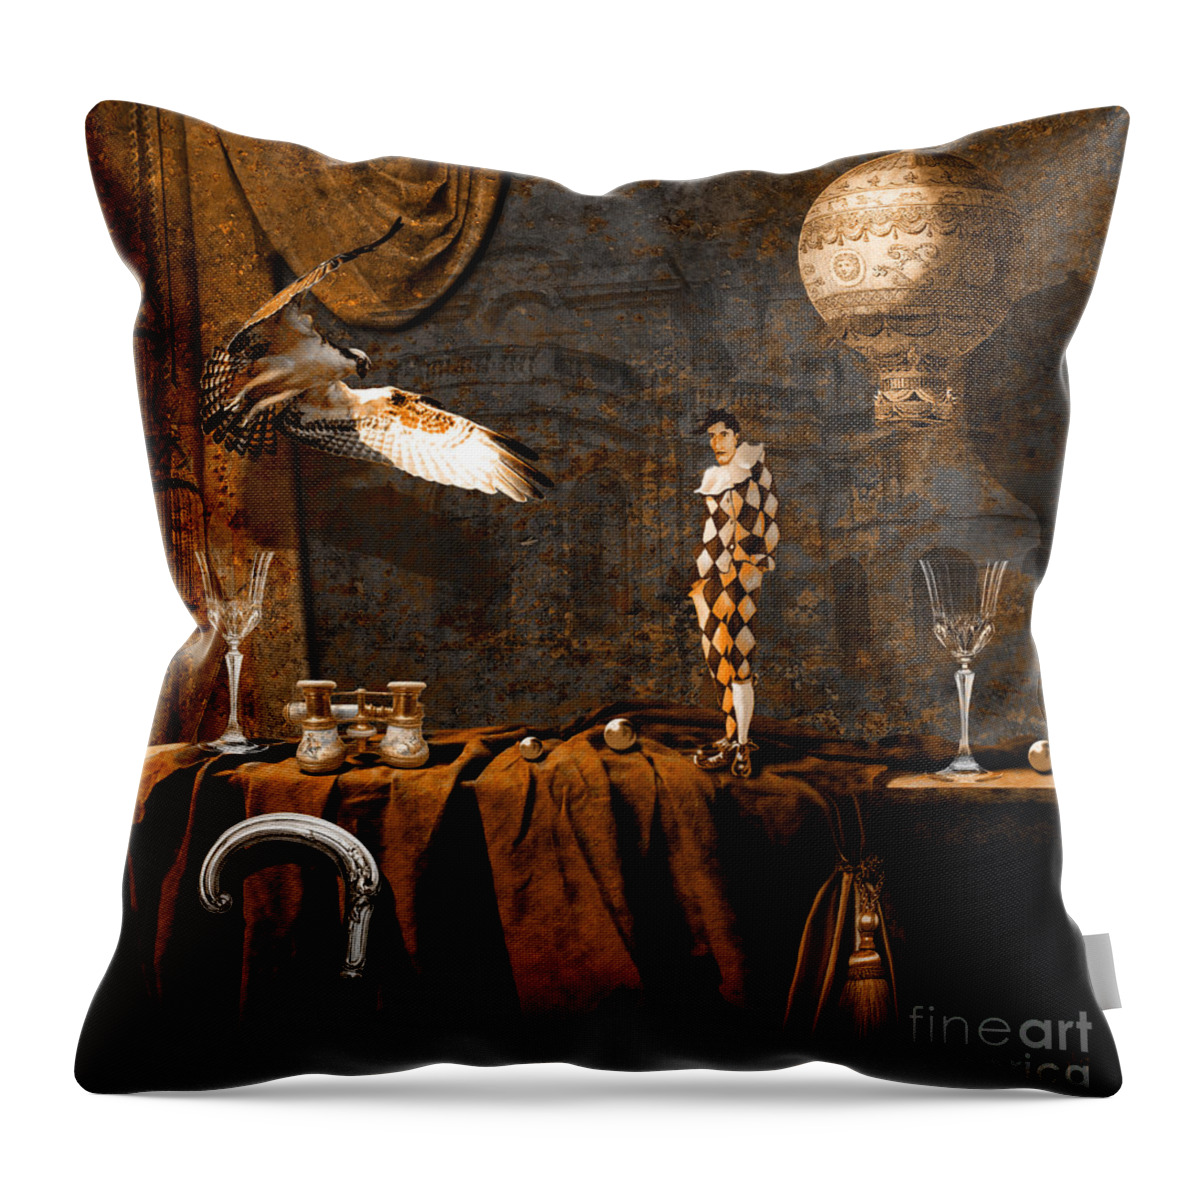 Theater Throw Pillow featuring the digital art After theater by Alexa Szlavics